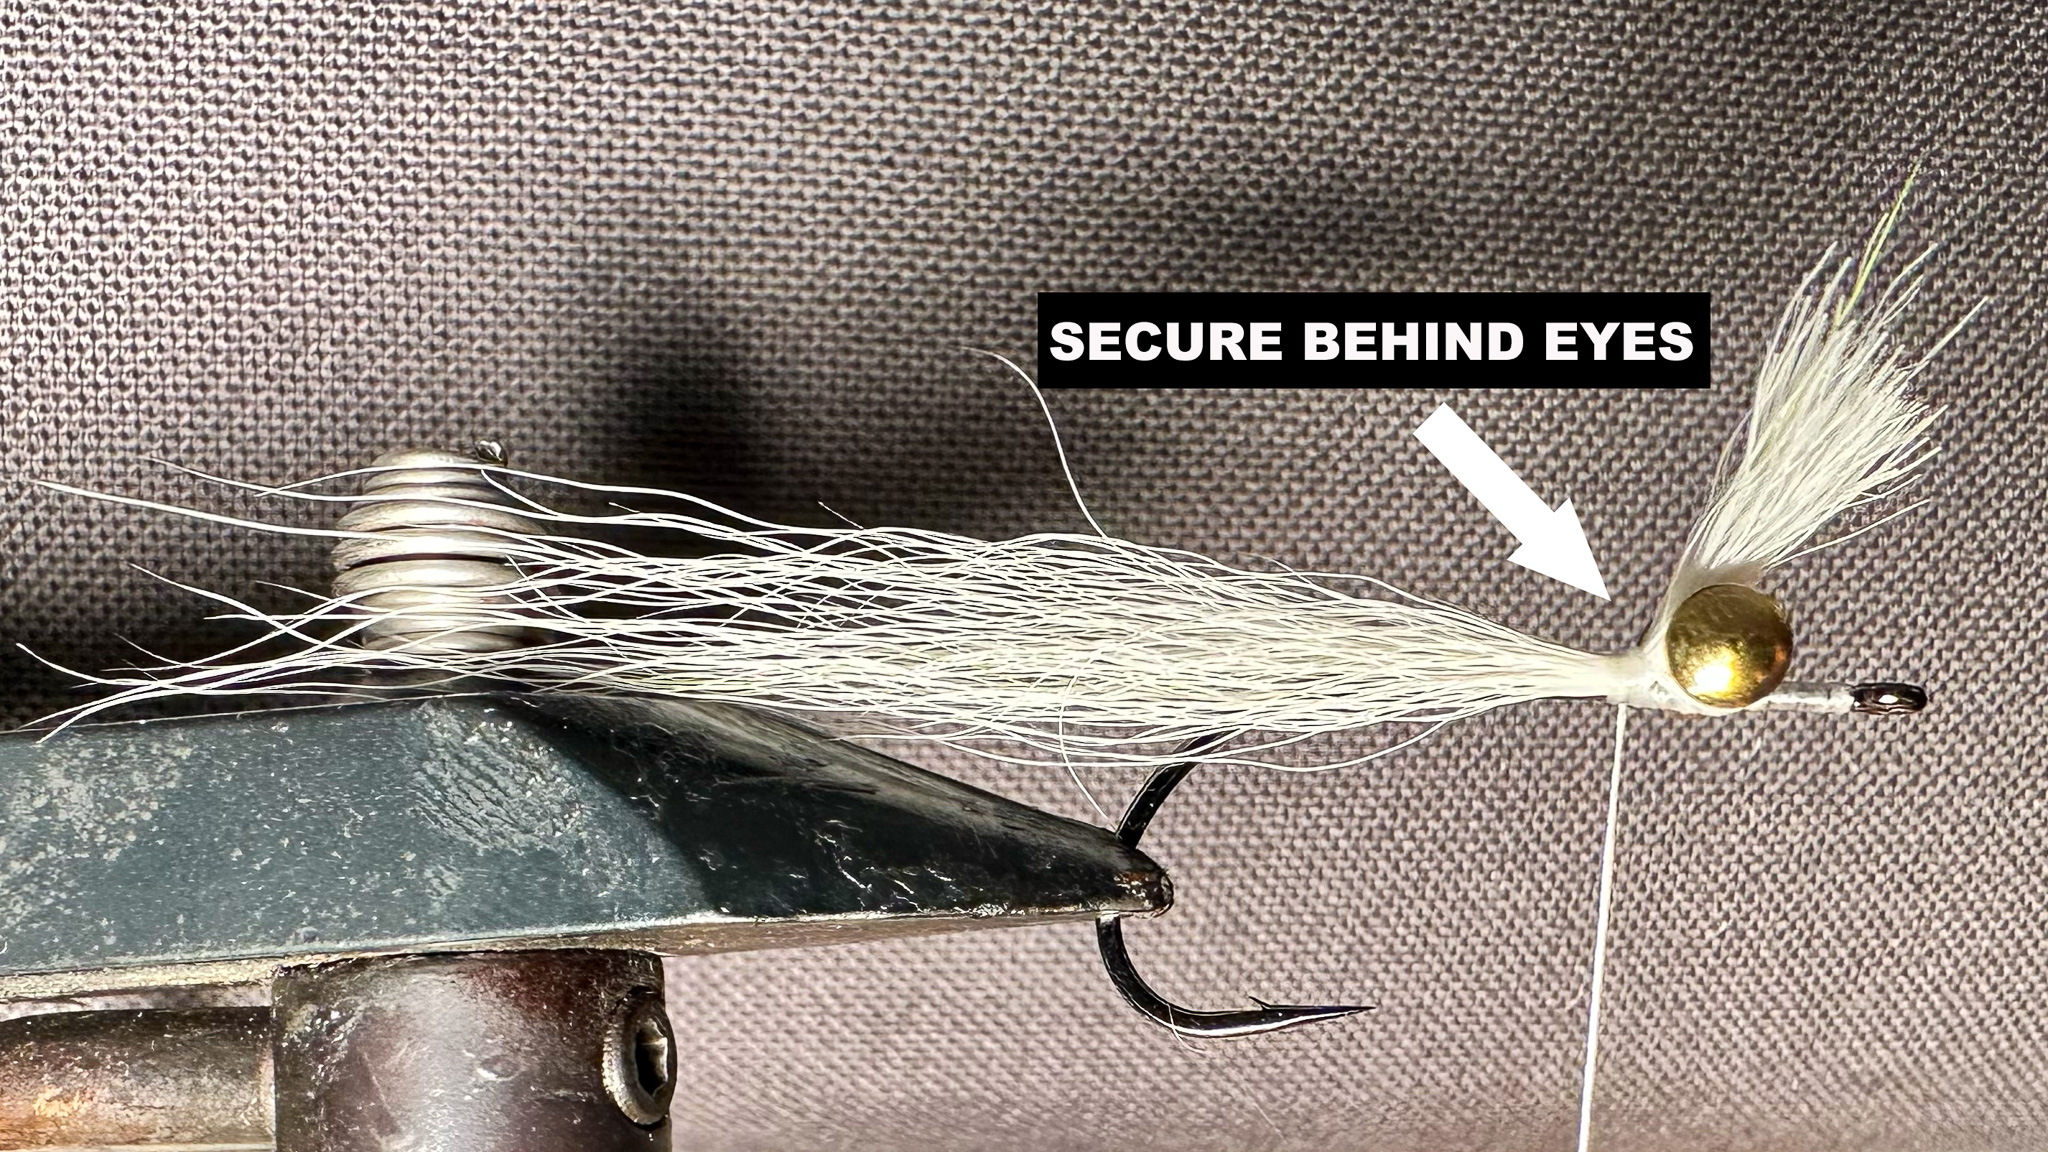 The second step of tying a Clouser, which shows an arrow pointing to how to secure the materials behind the fly's eyes.